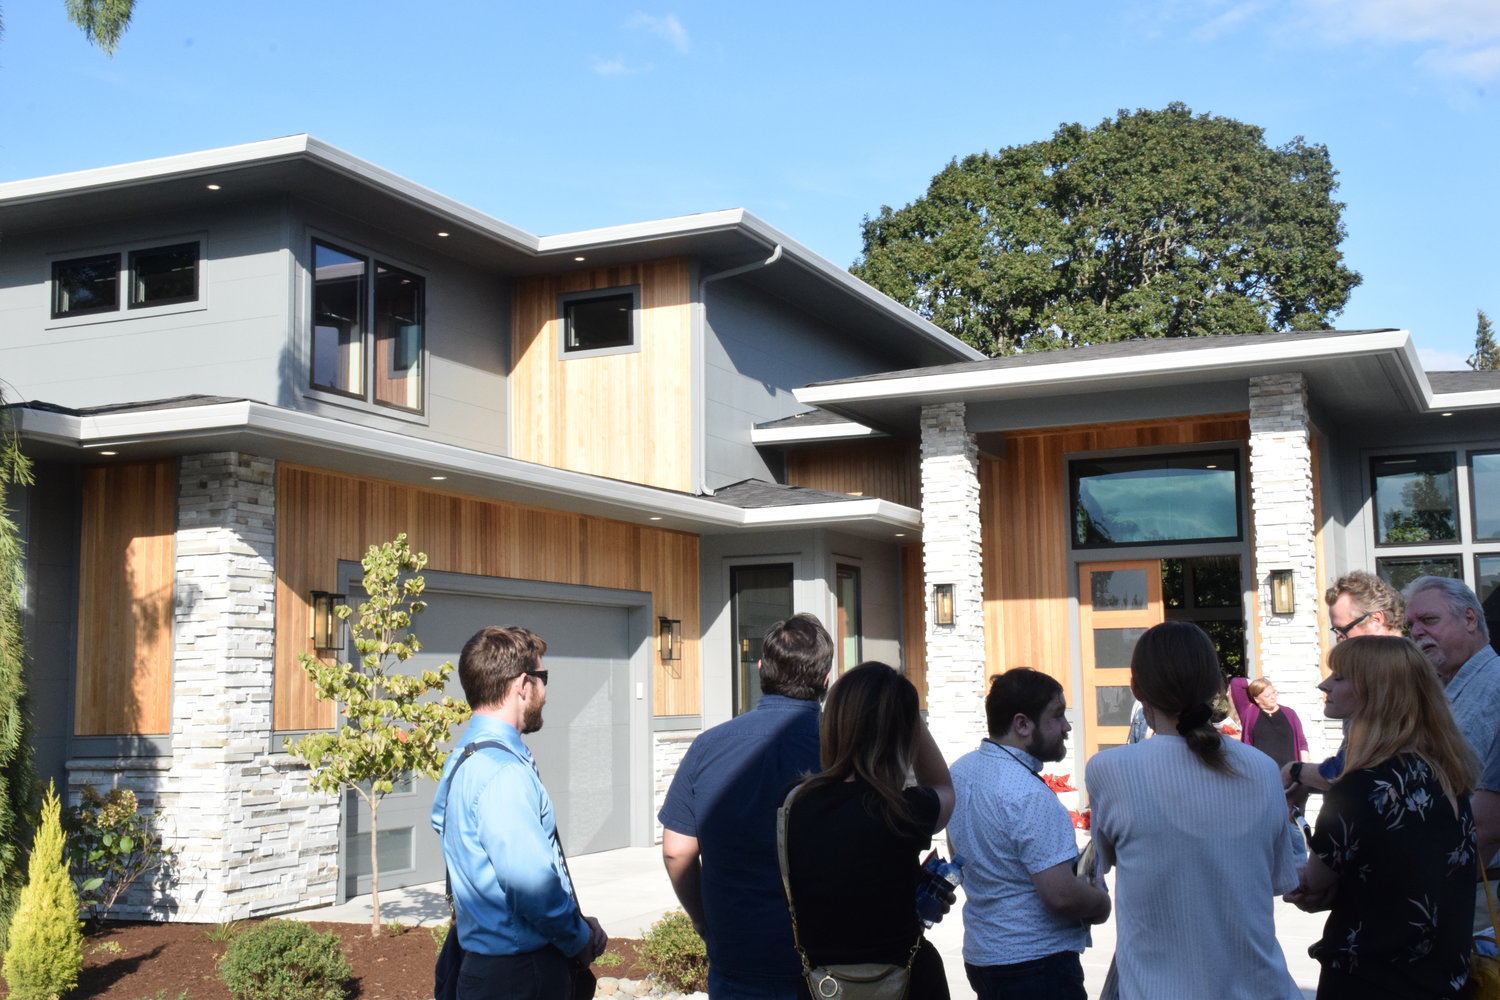 Participants of the 2022 Parade of Homes tour look at the “Oak View,” one of six homes on display during this year’s event, which is located in Ridgefield.